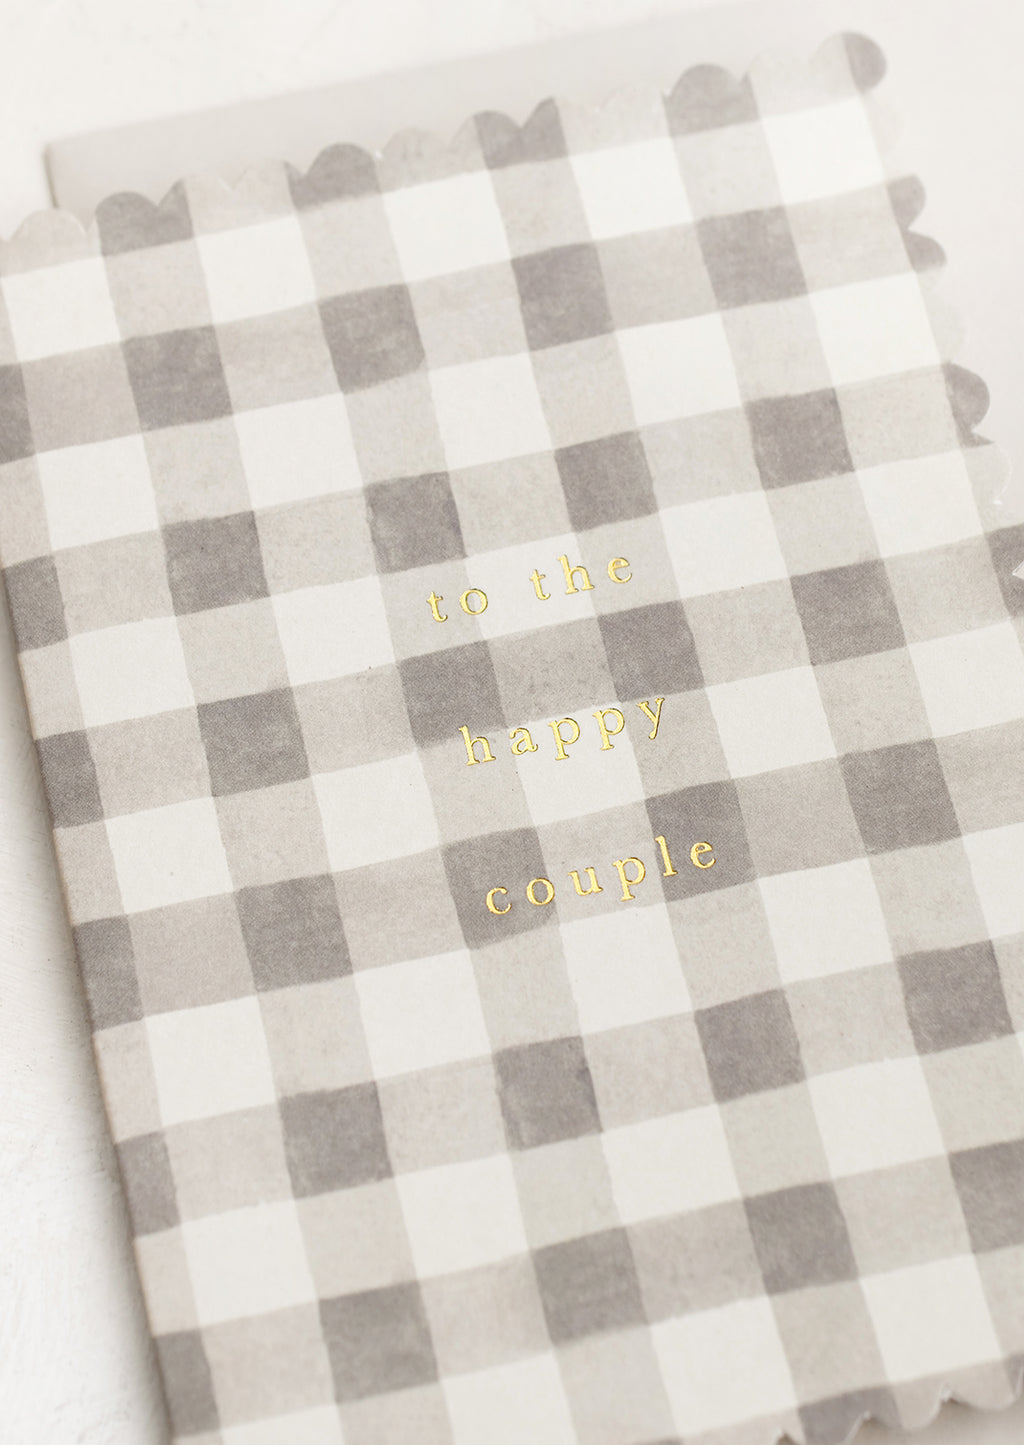 2: A scalloped edge card with grey gingham pattern reading "To the happy couple".